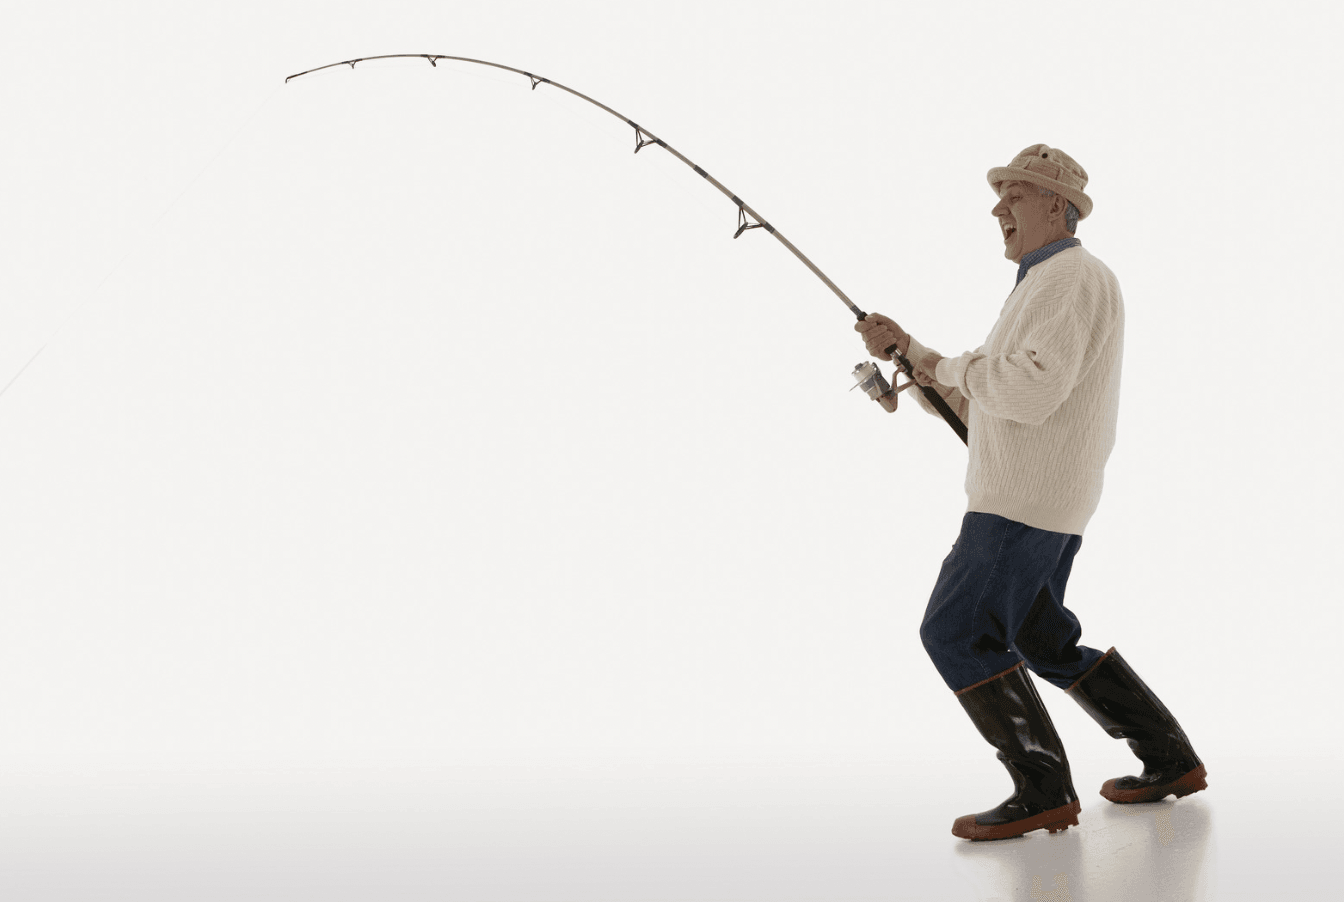 Recreational Fishing: A Favorite American Pastime